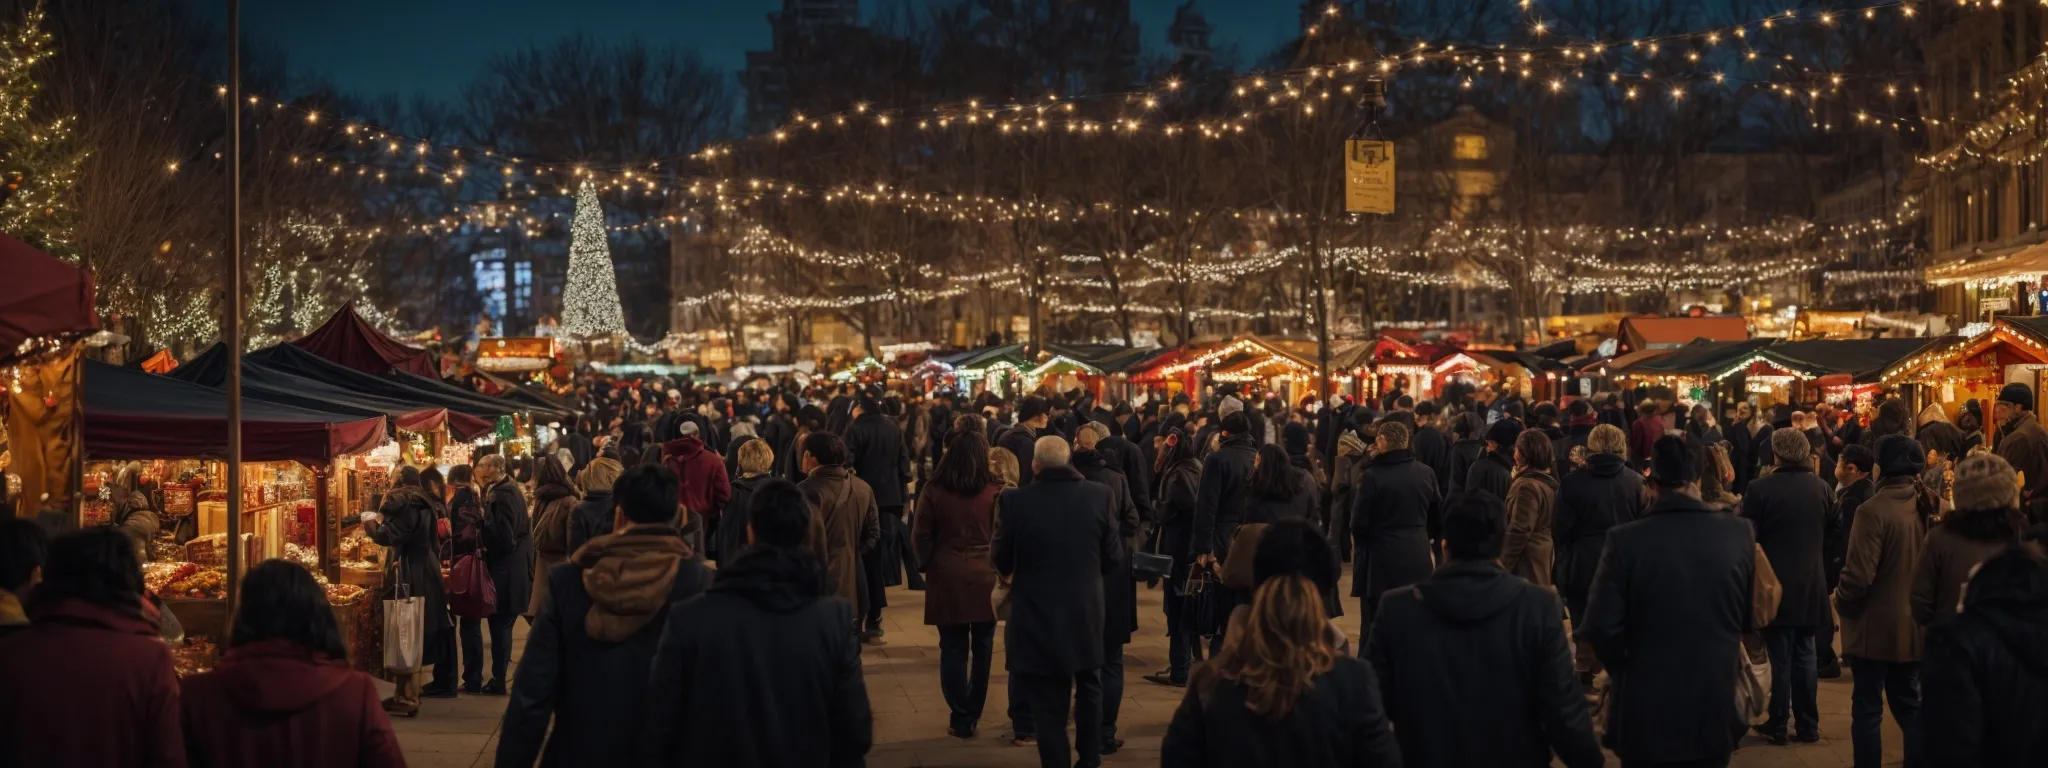 a crowded holiday market with shoppers browsing through a festive stall displaying glowing reviews on a digital screen.